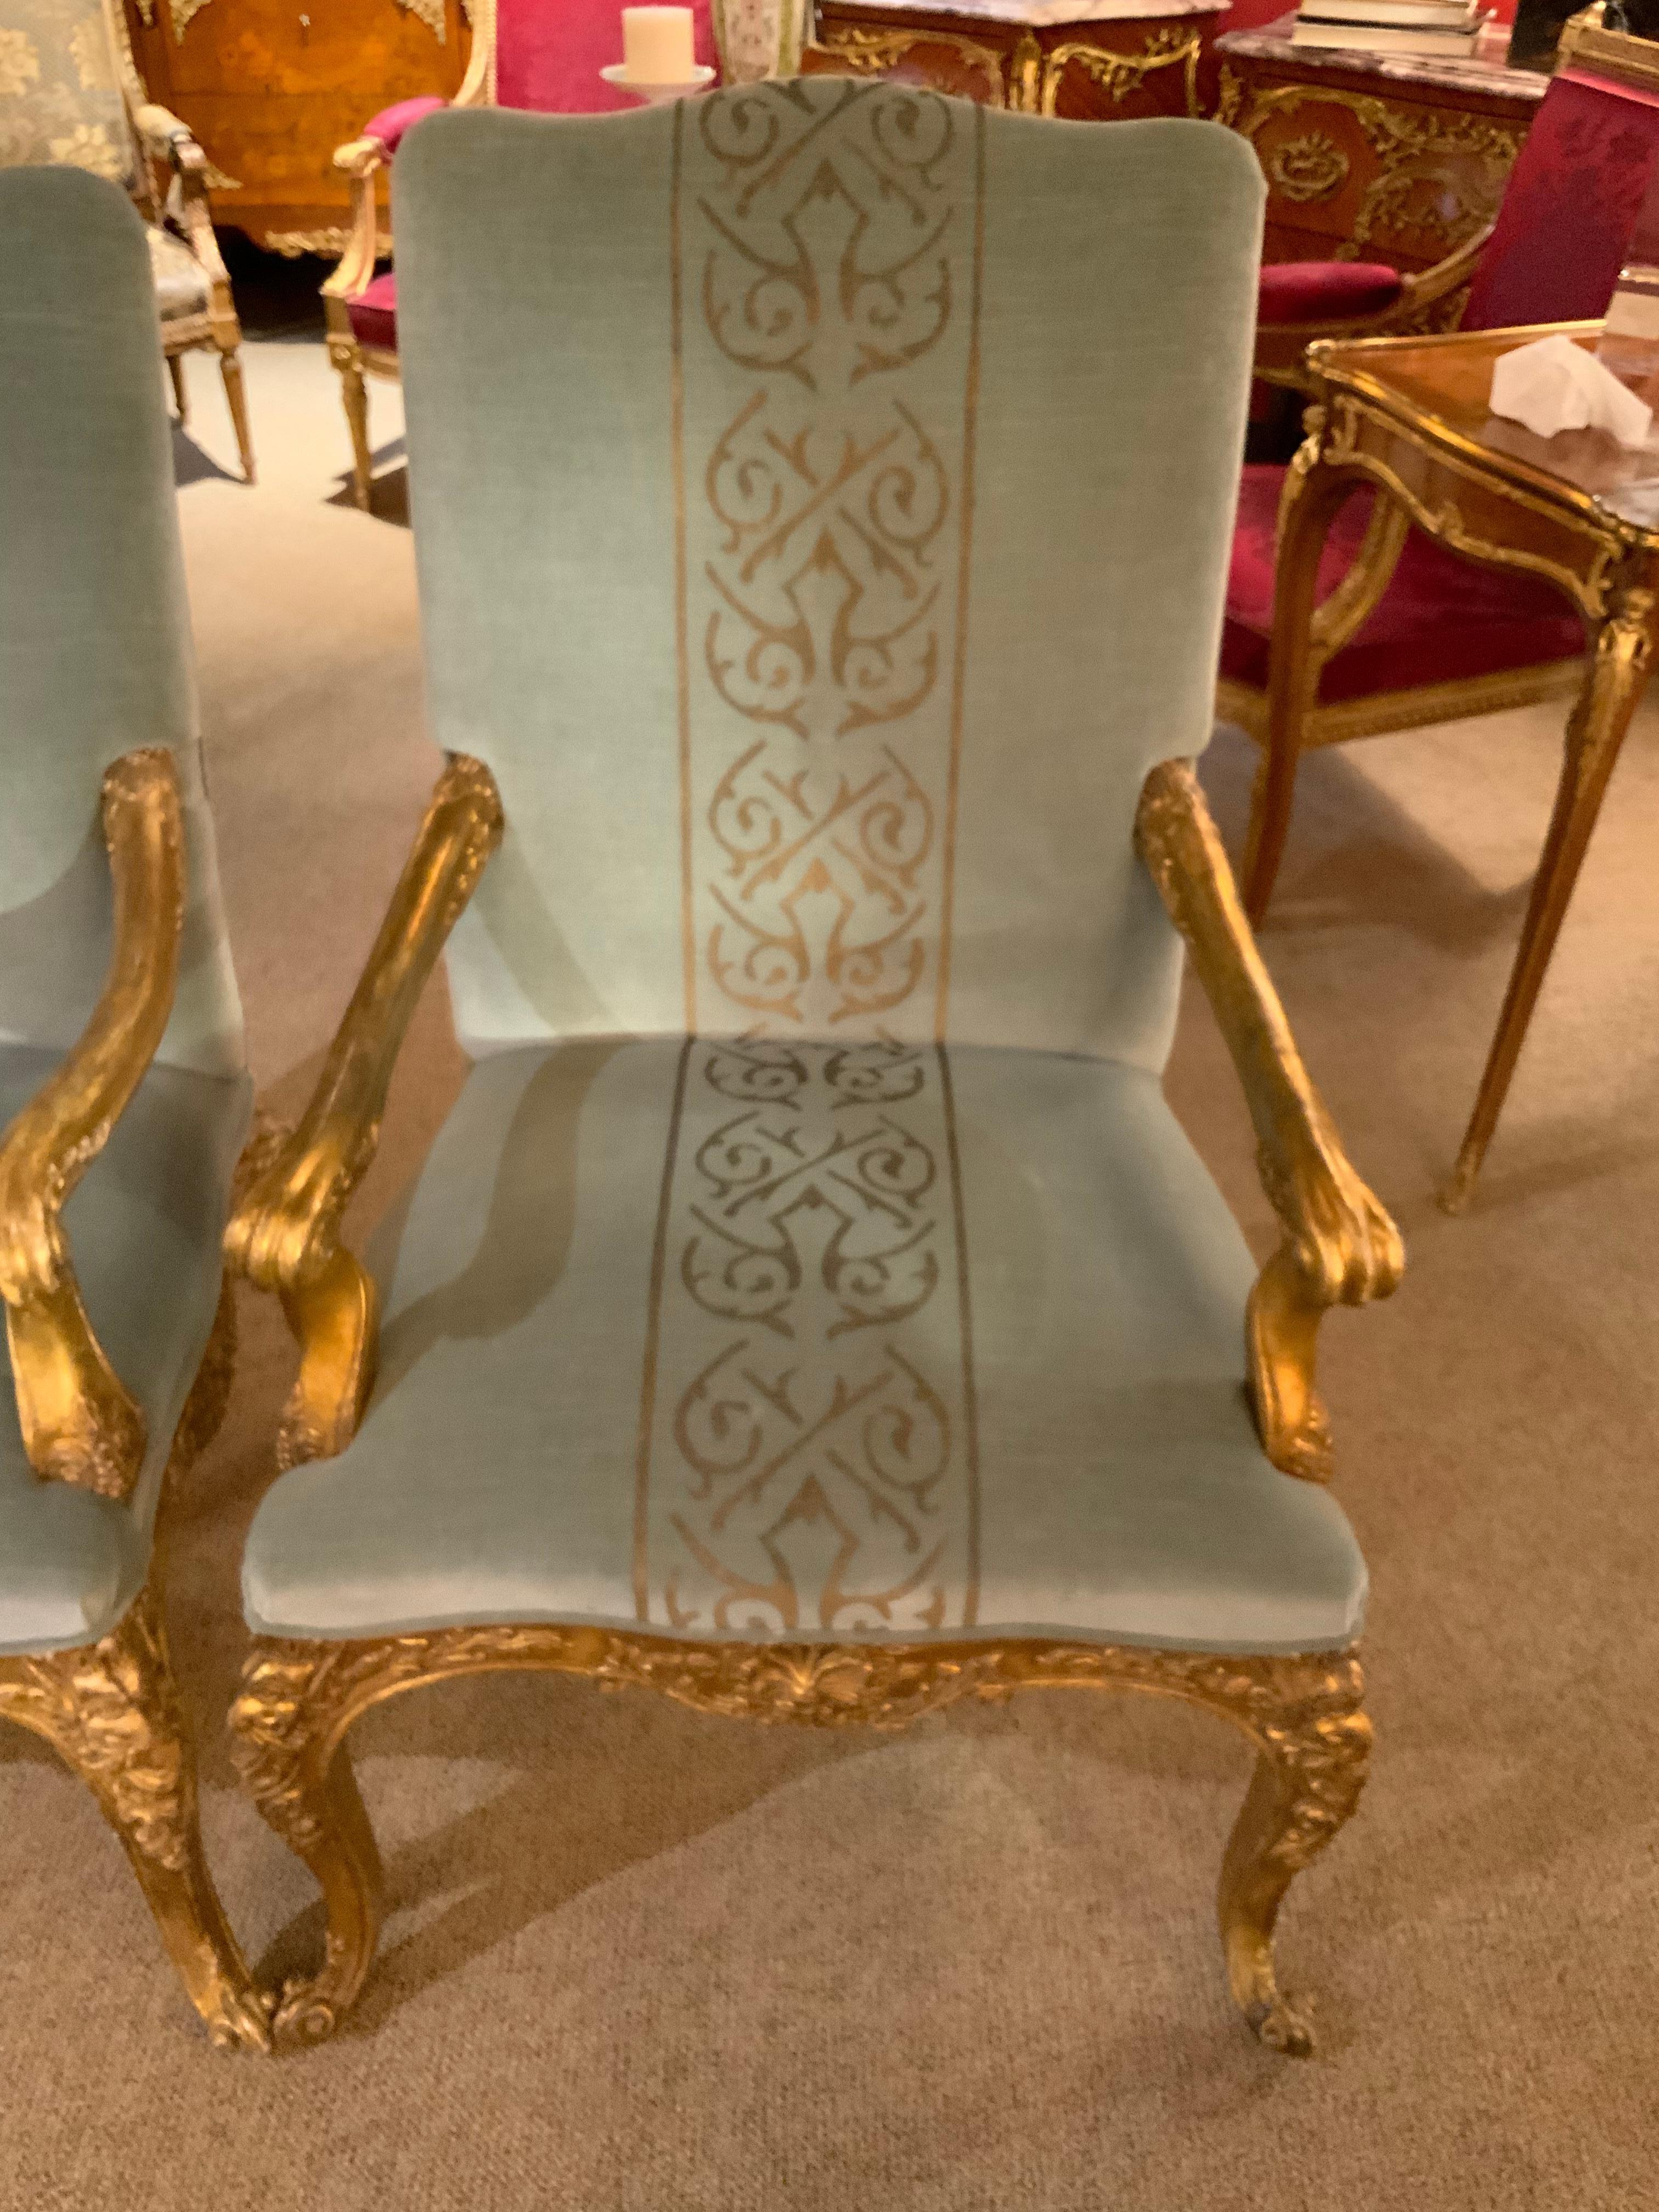 French Pair of Giltwood Arm Chairs, Louis XV-Style Upholstered in Pale Aqua Blue /Gold